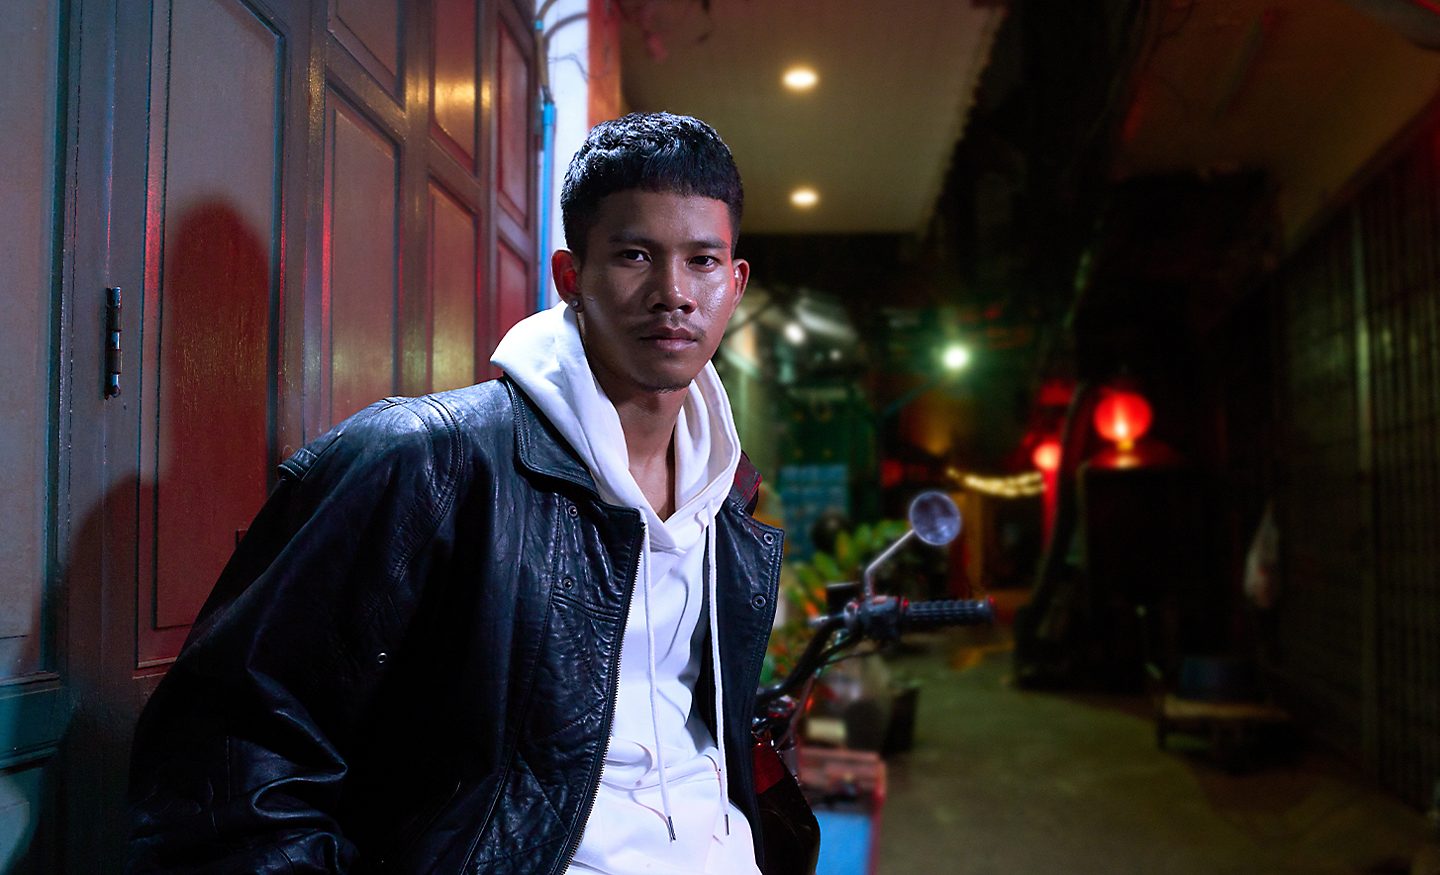 Low-light portrait of a young person in an urban setting at night